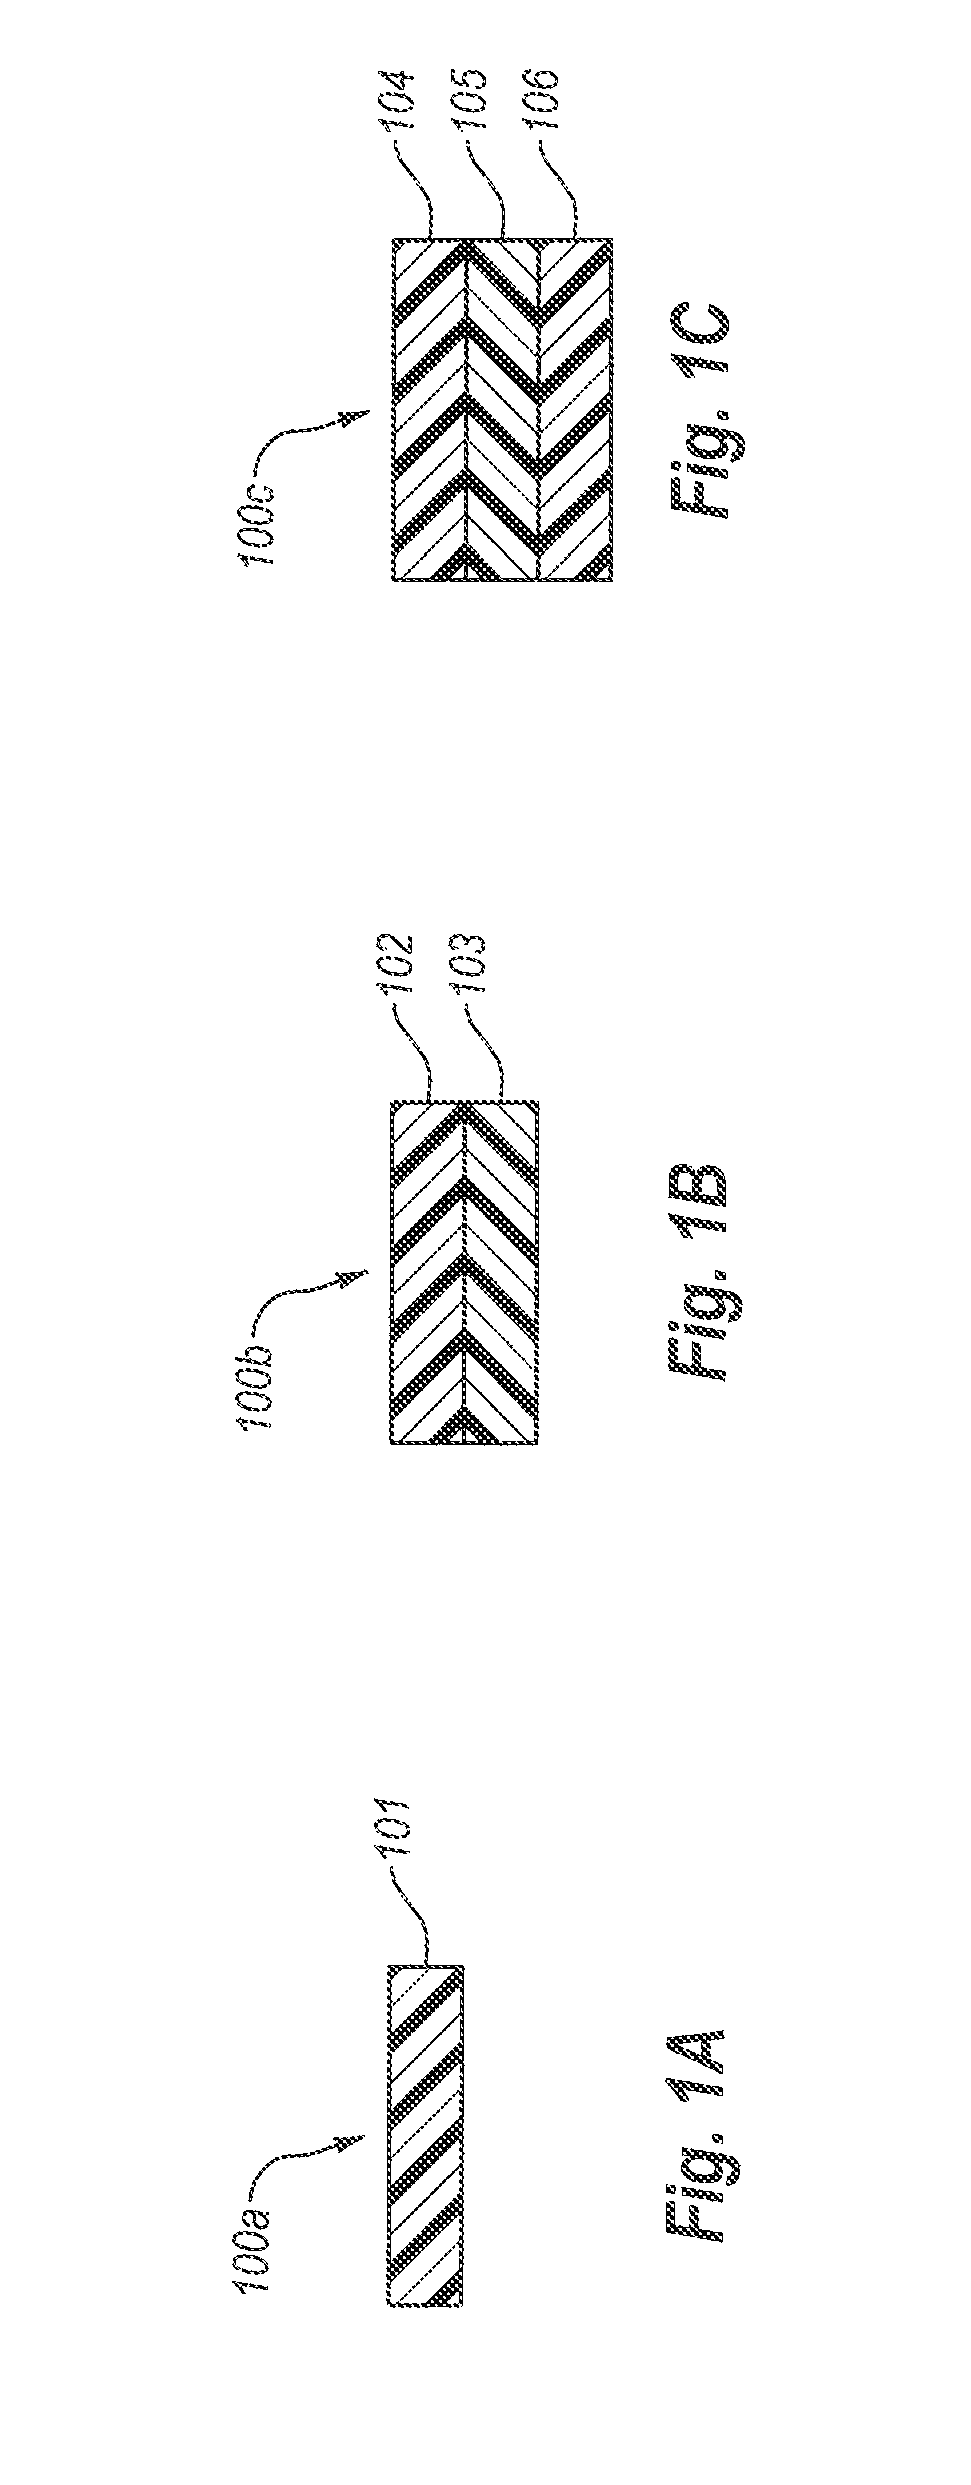 Multi-layered thermoplastic bag with reinforced seals and methods of making the same